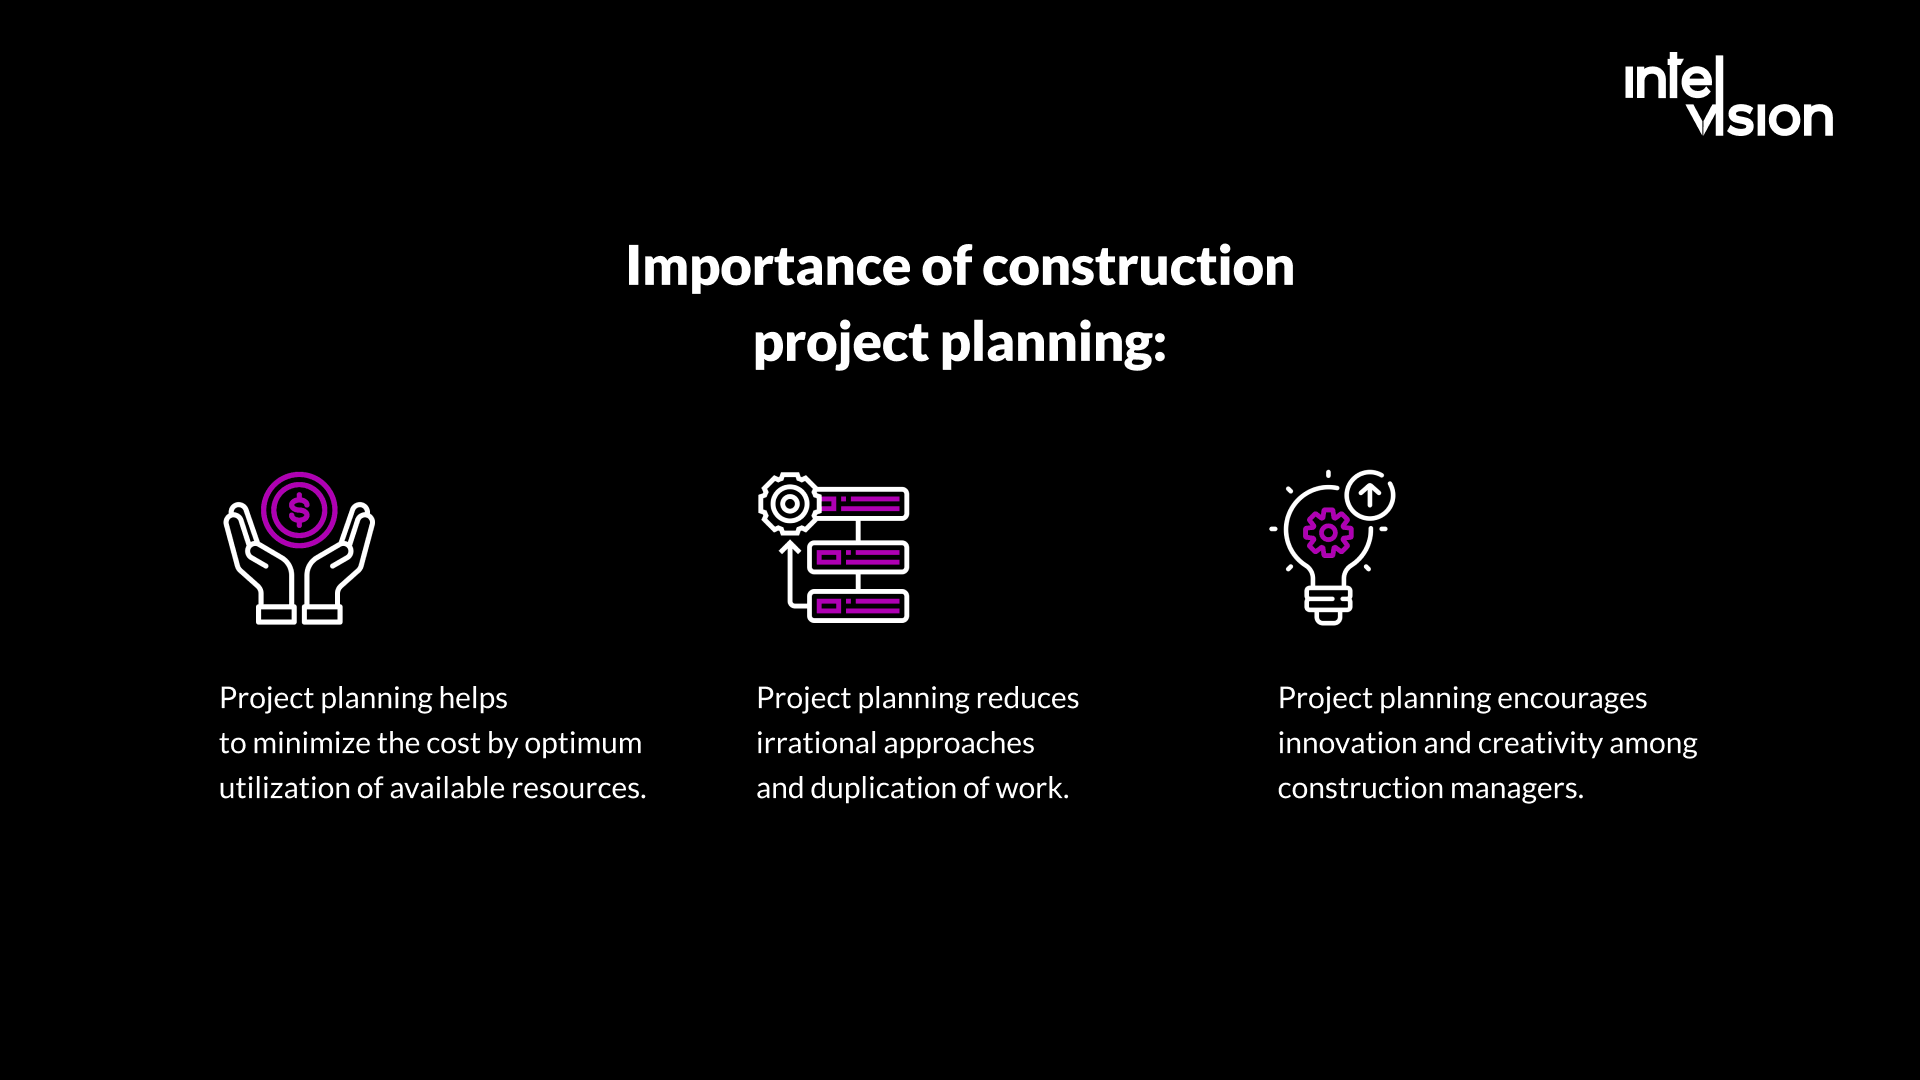 Importance of construction project planning